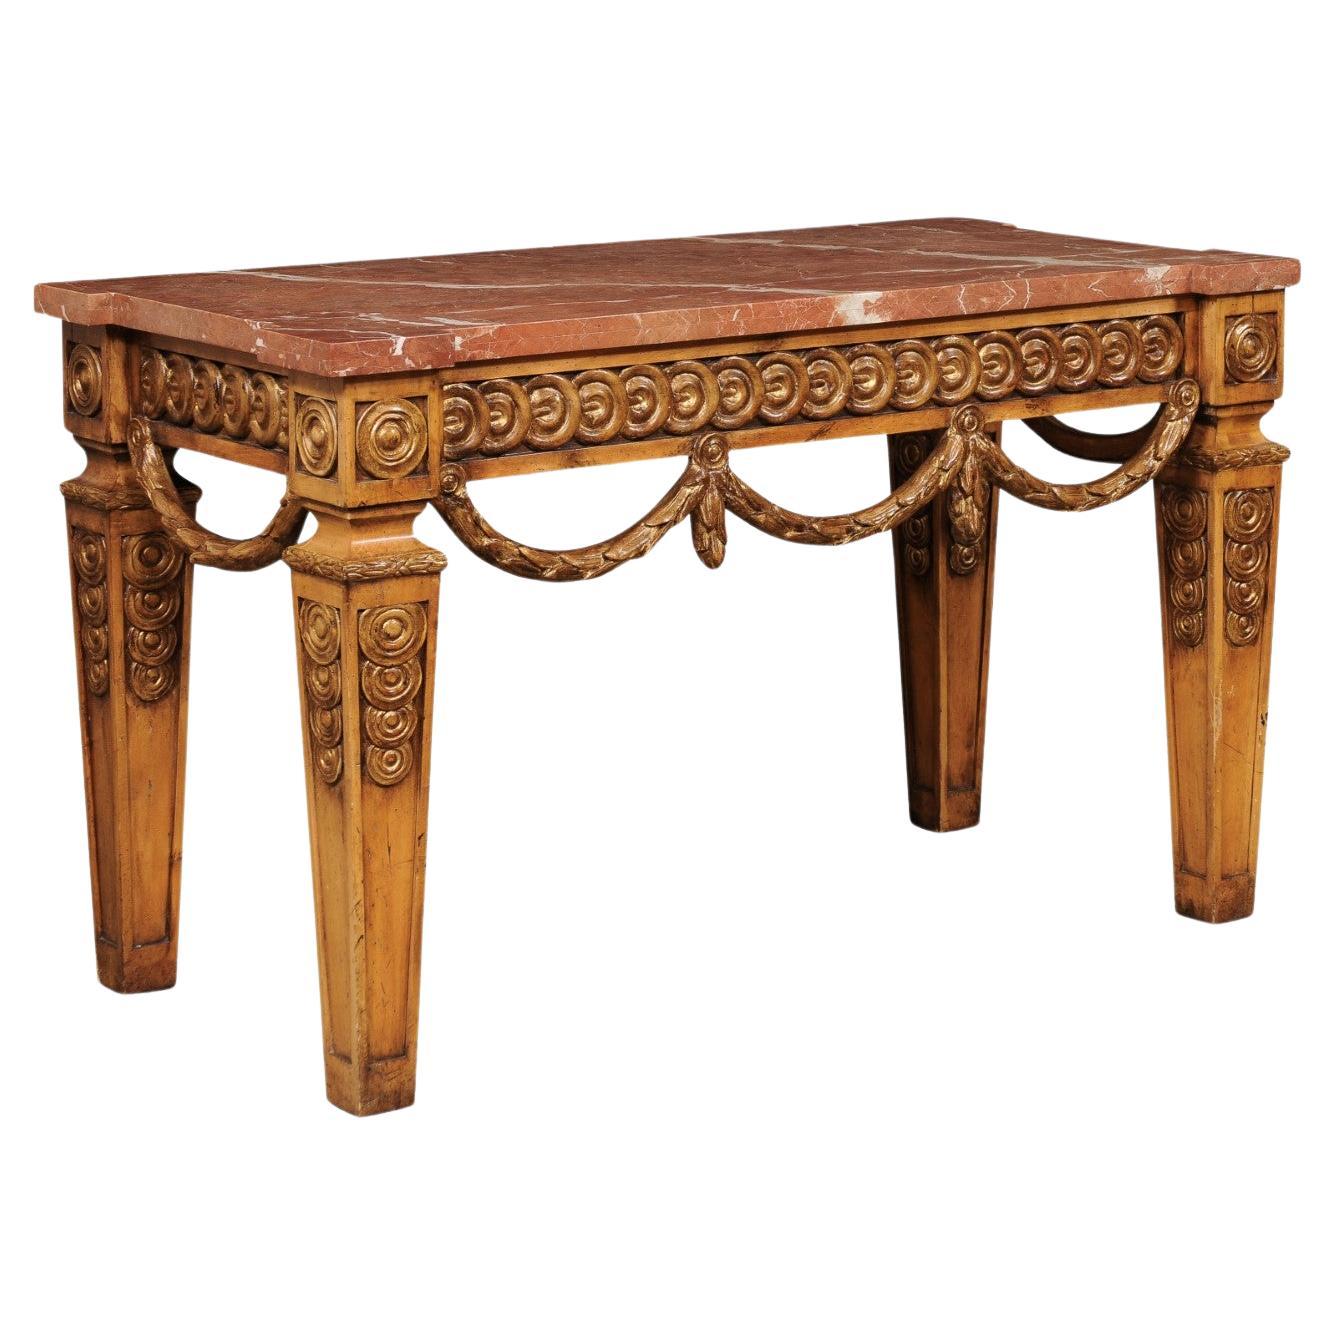 A Unique Carved Wood & Marble Top Console Table w/Bold Robust Presence, 5 Ft  For Sale